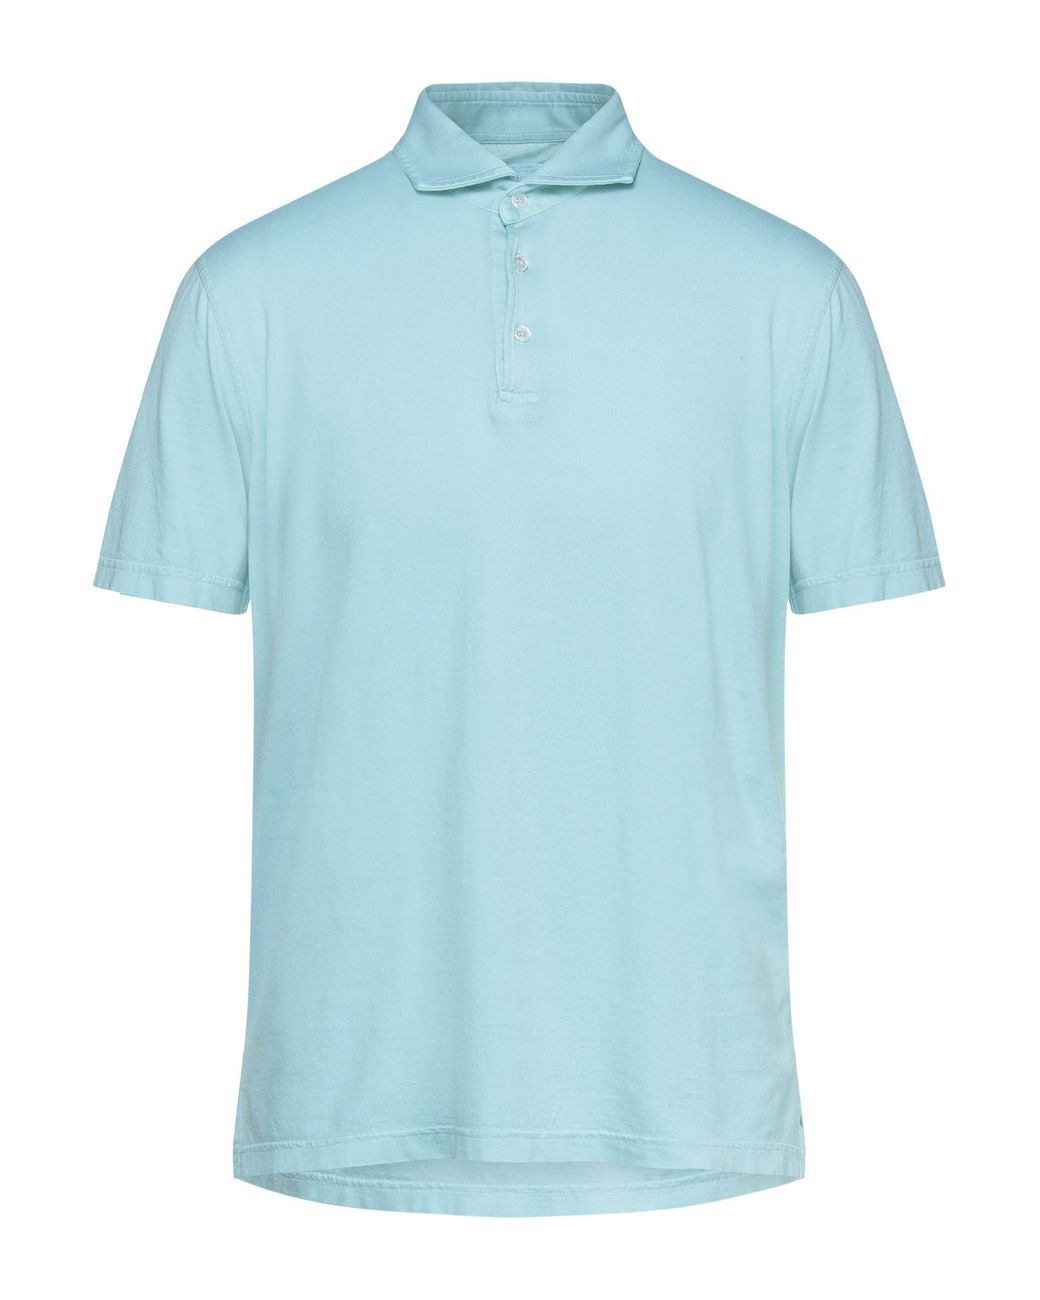 Fedeli Polo Shirt in Turquoise (Blue) for Men - Lyst